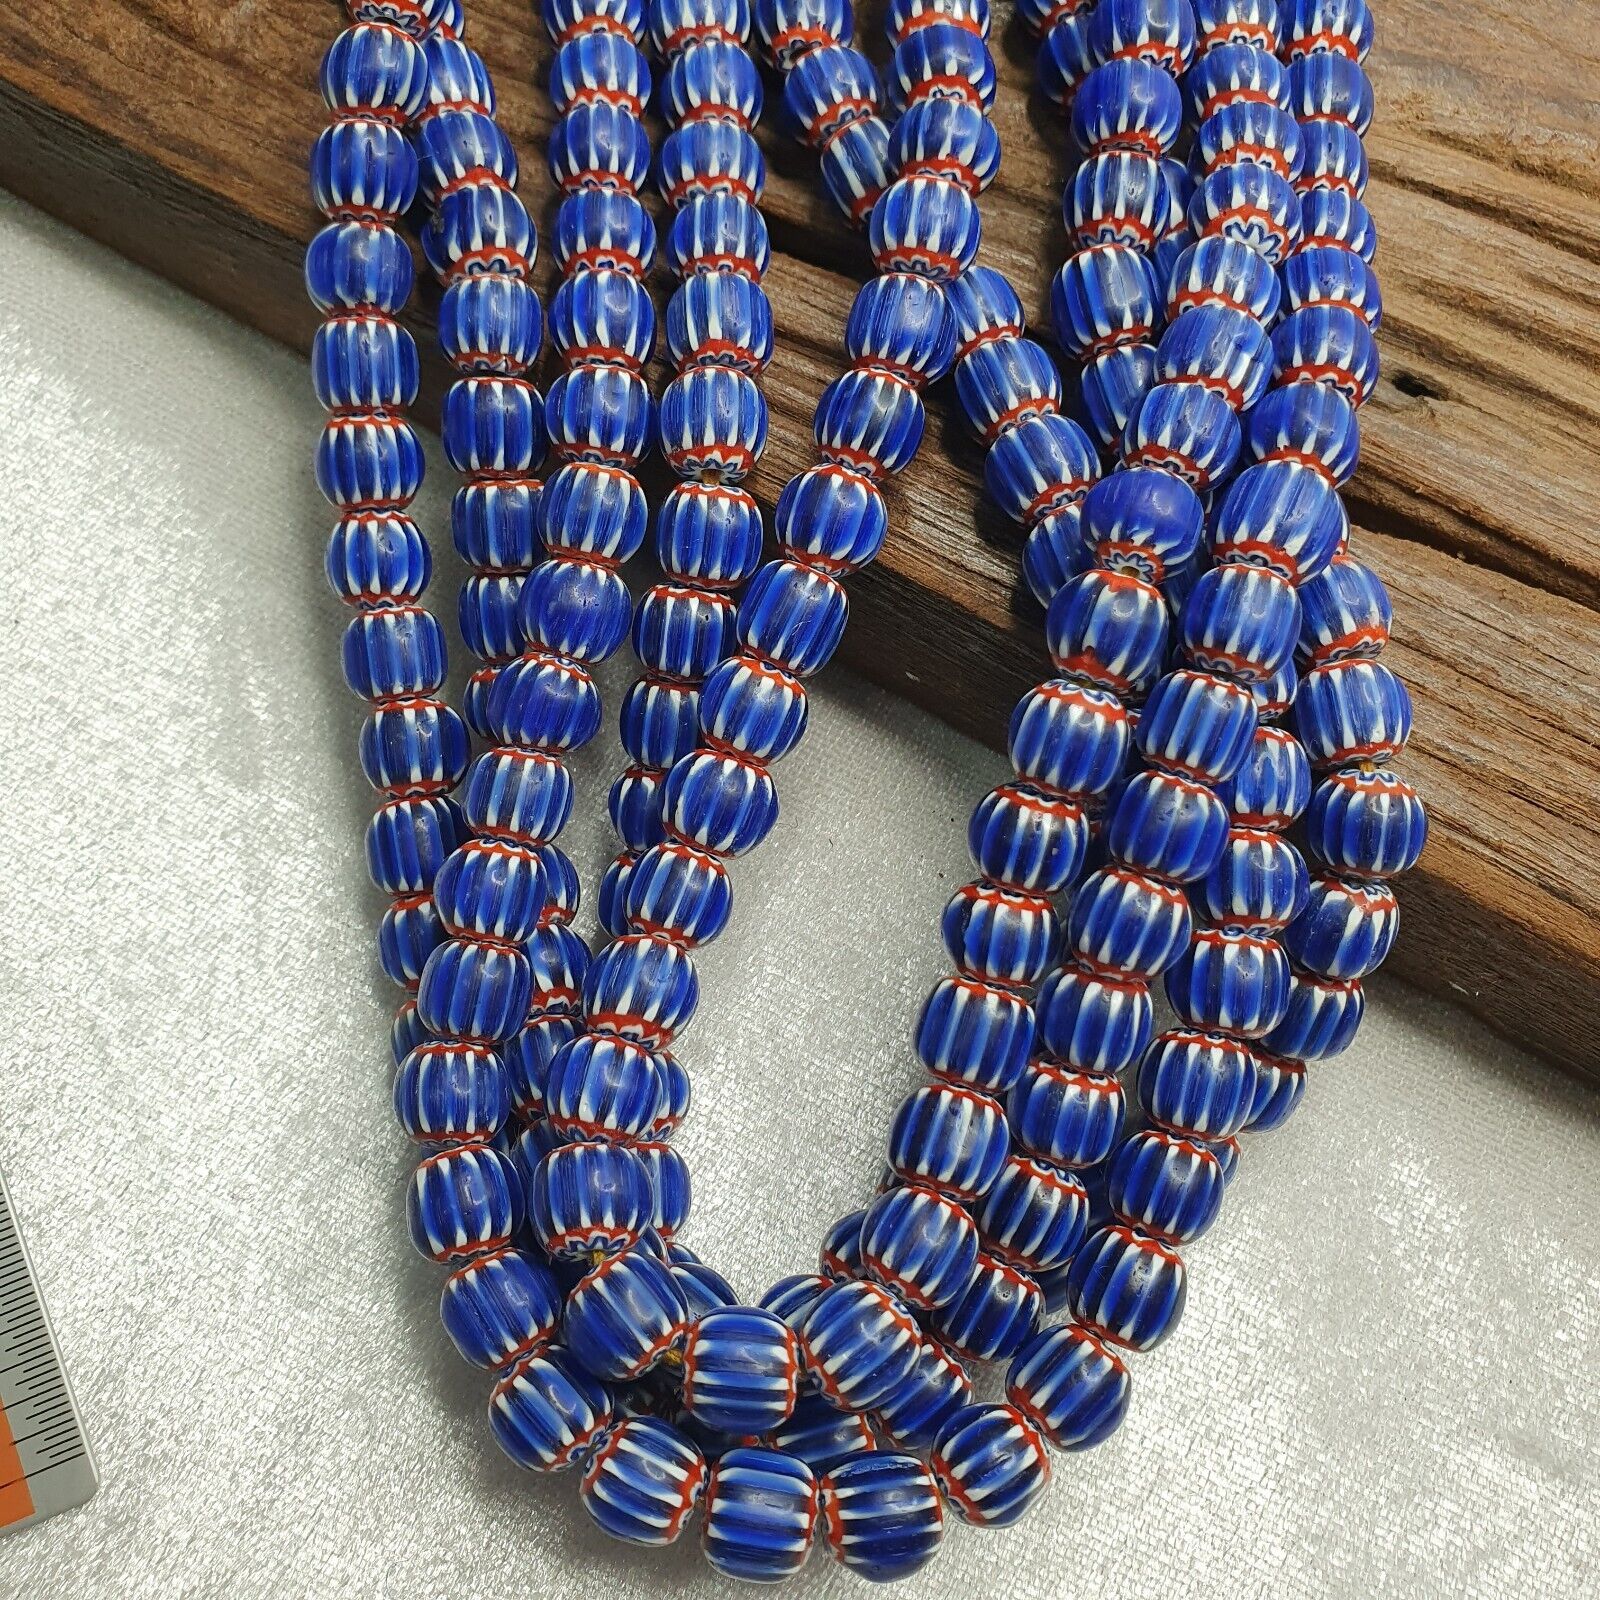 Vintage Blue Chevron Venetian Style Multilayers 10mm Glass Beads Necklace